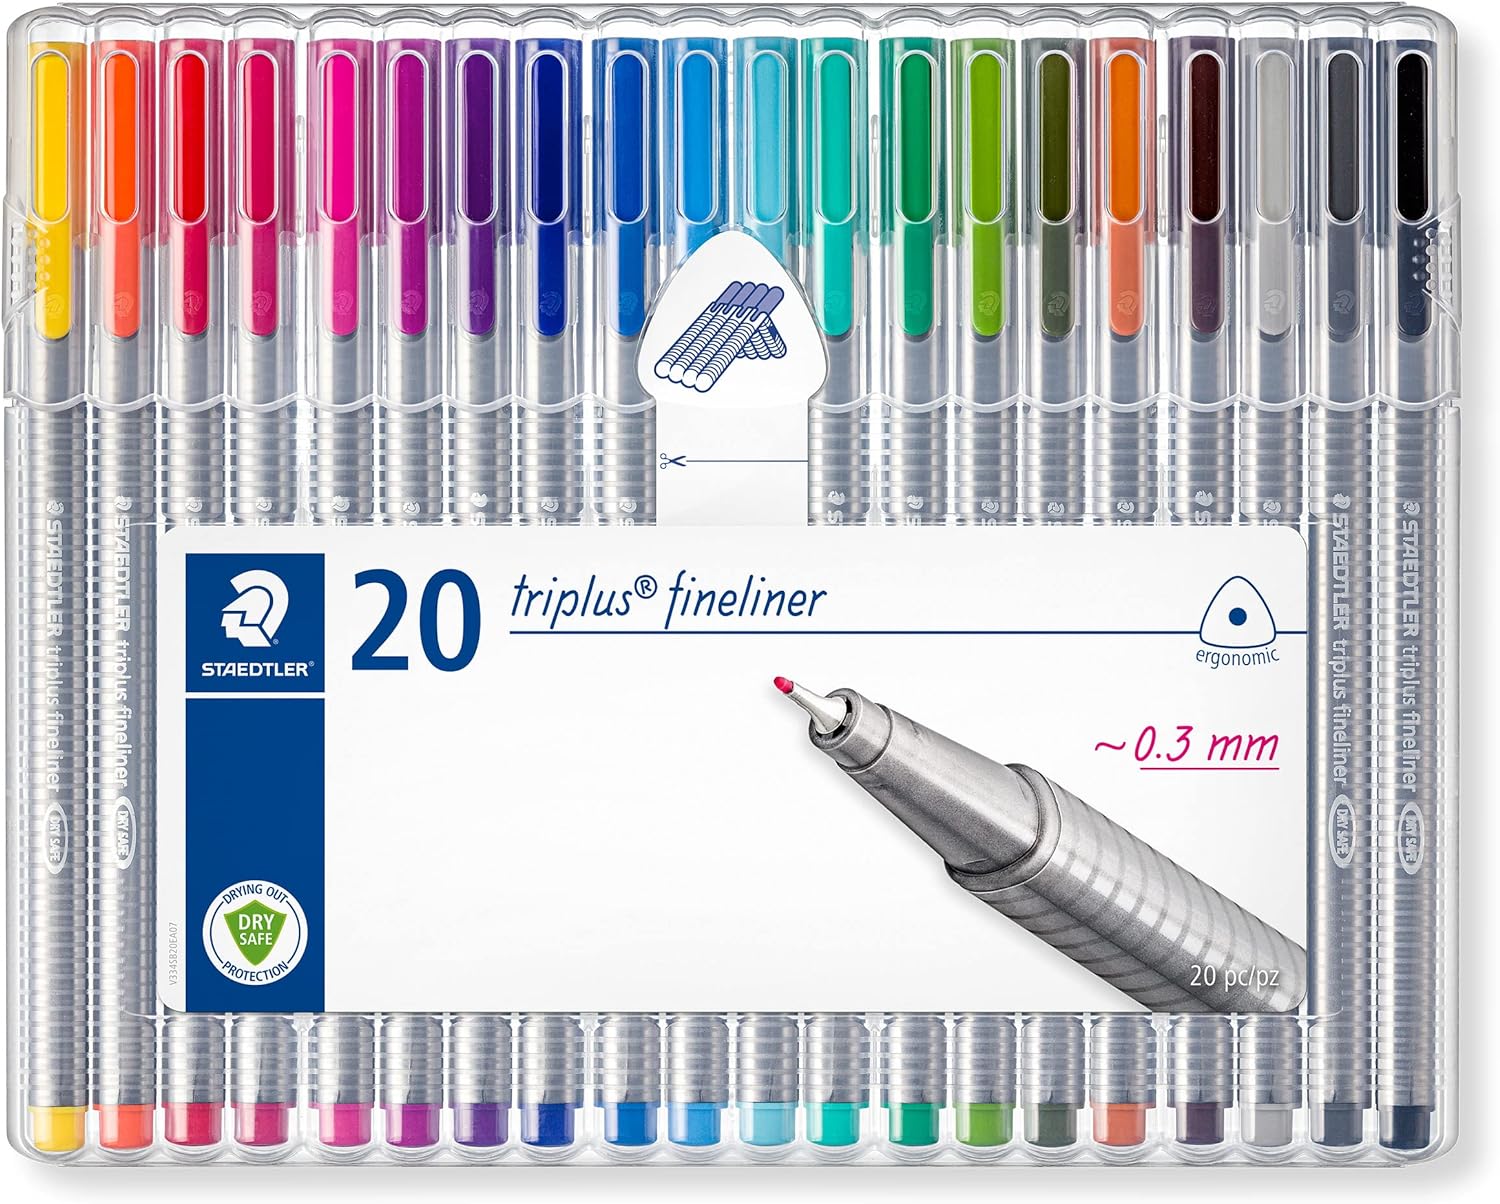 staedtler Triplus fineliner pens review best pens where the ink has lasted more than 7 years planner pens with long lasting ink